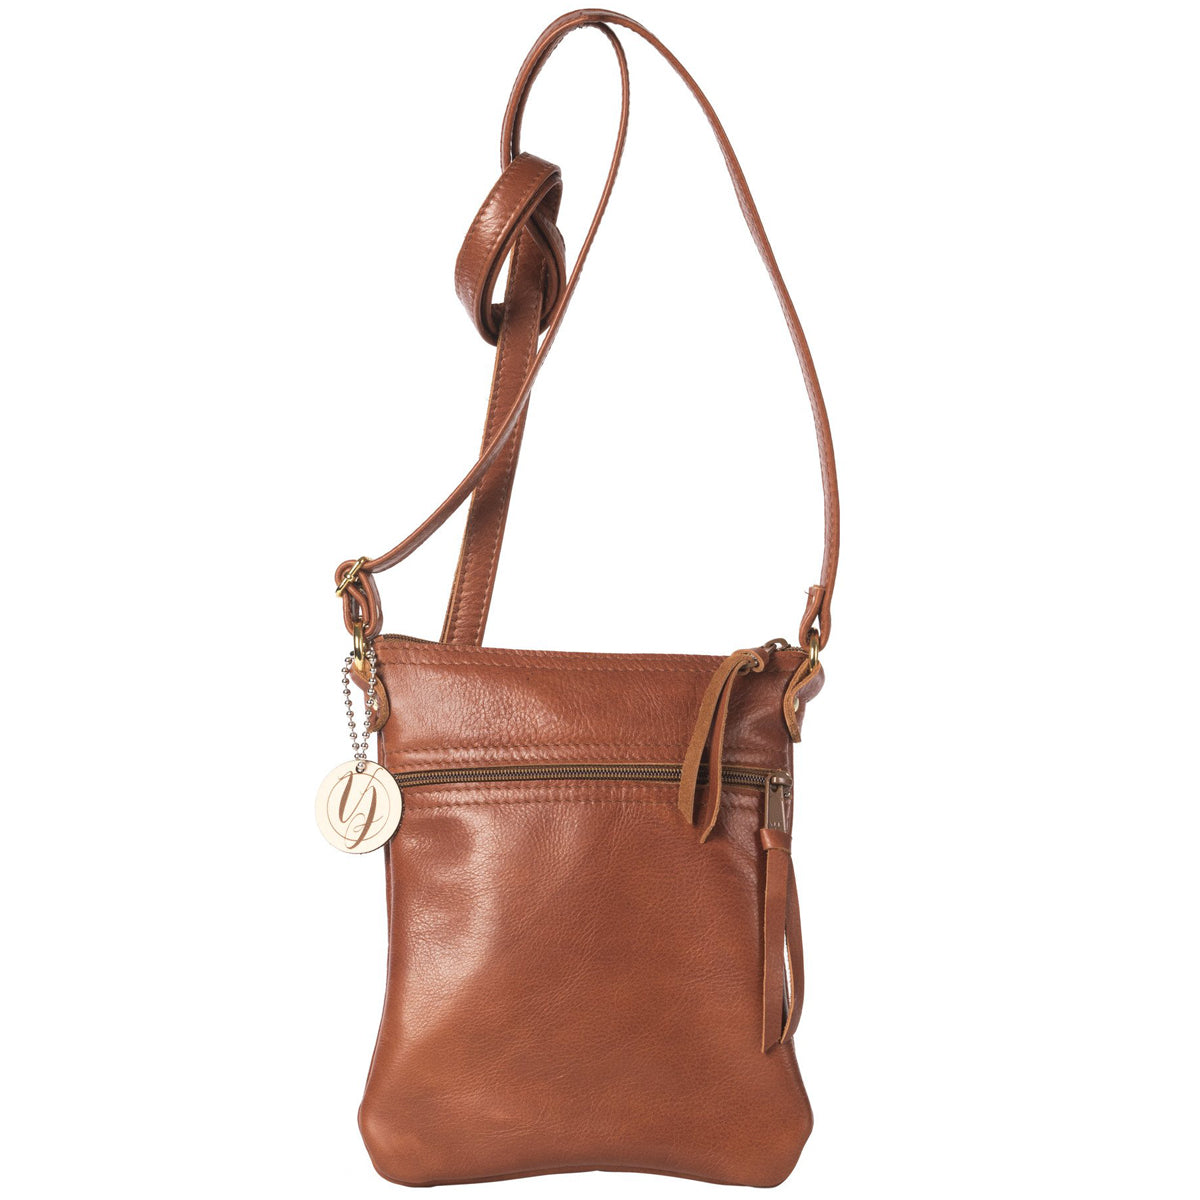 Bourbon leather cross-body bag handmade in the USA by Vicki Jean. 